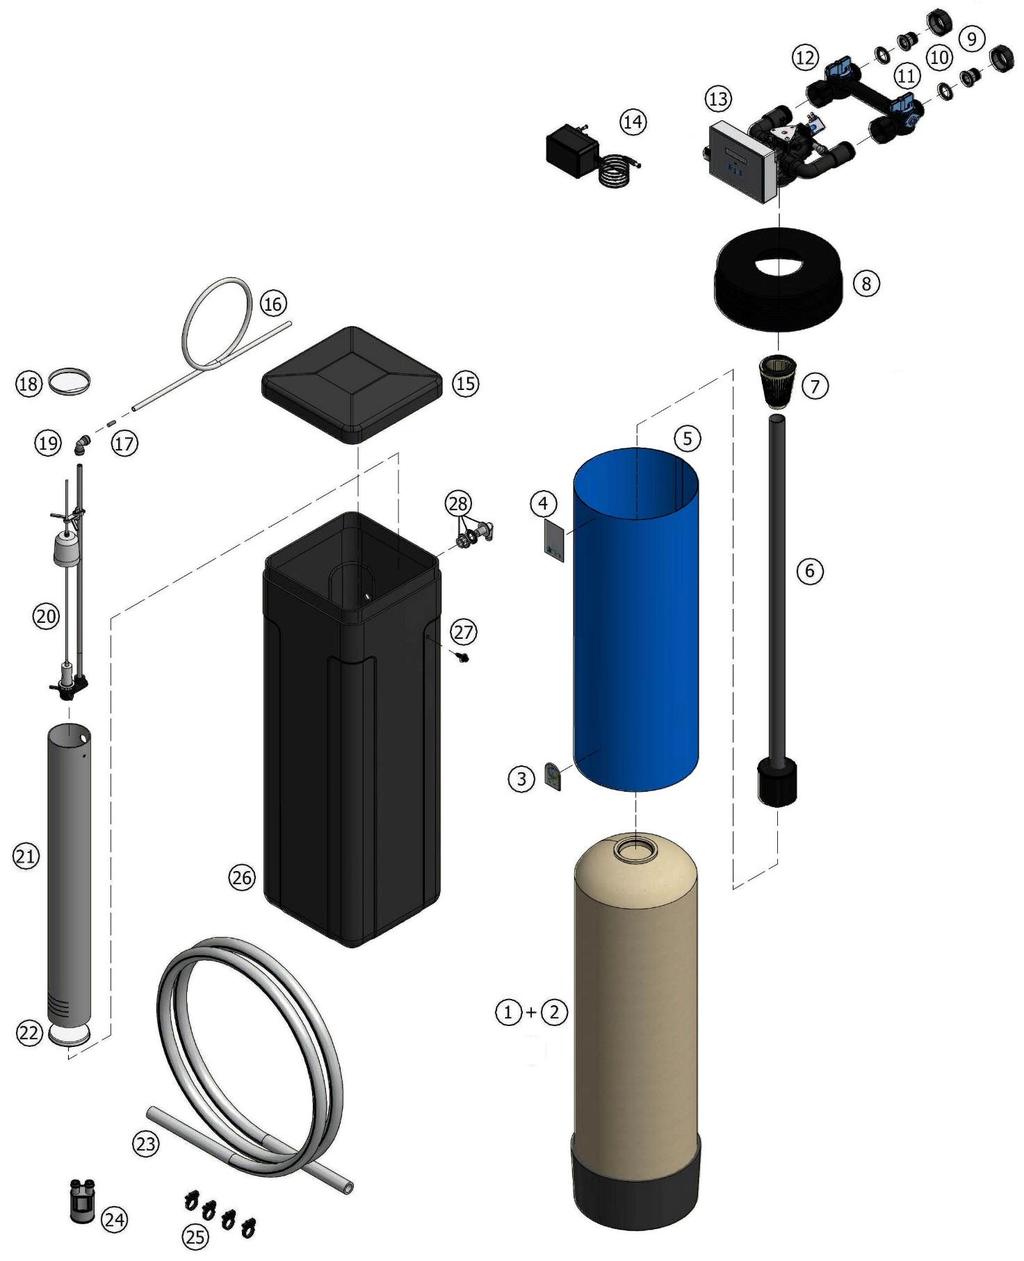 EXPLODED VIEW -